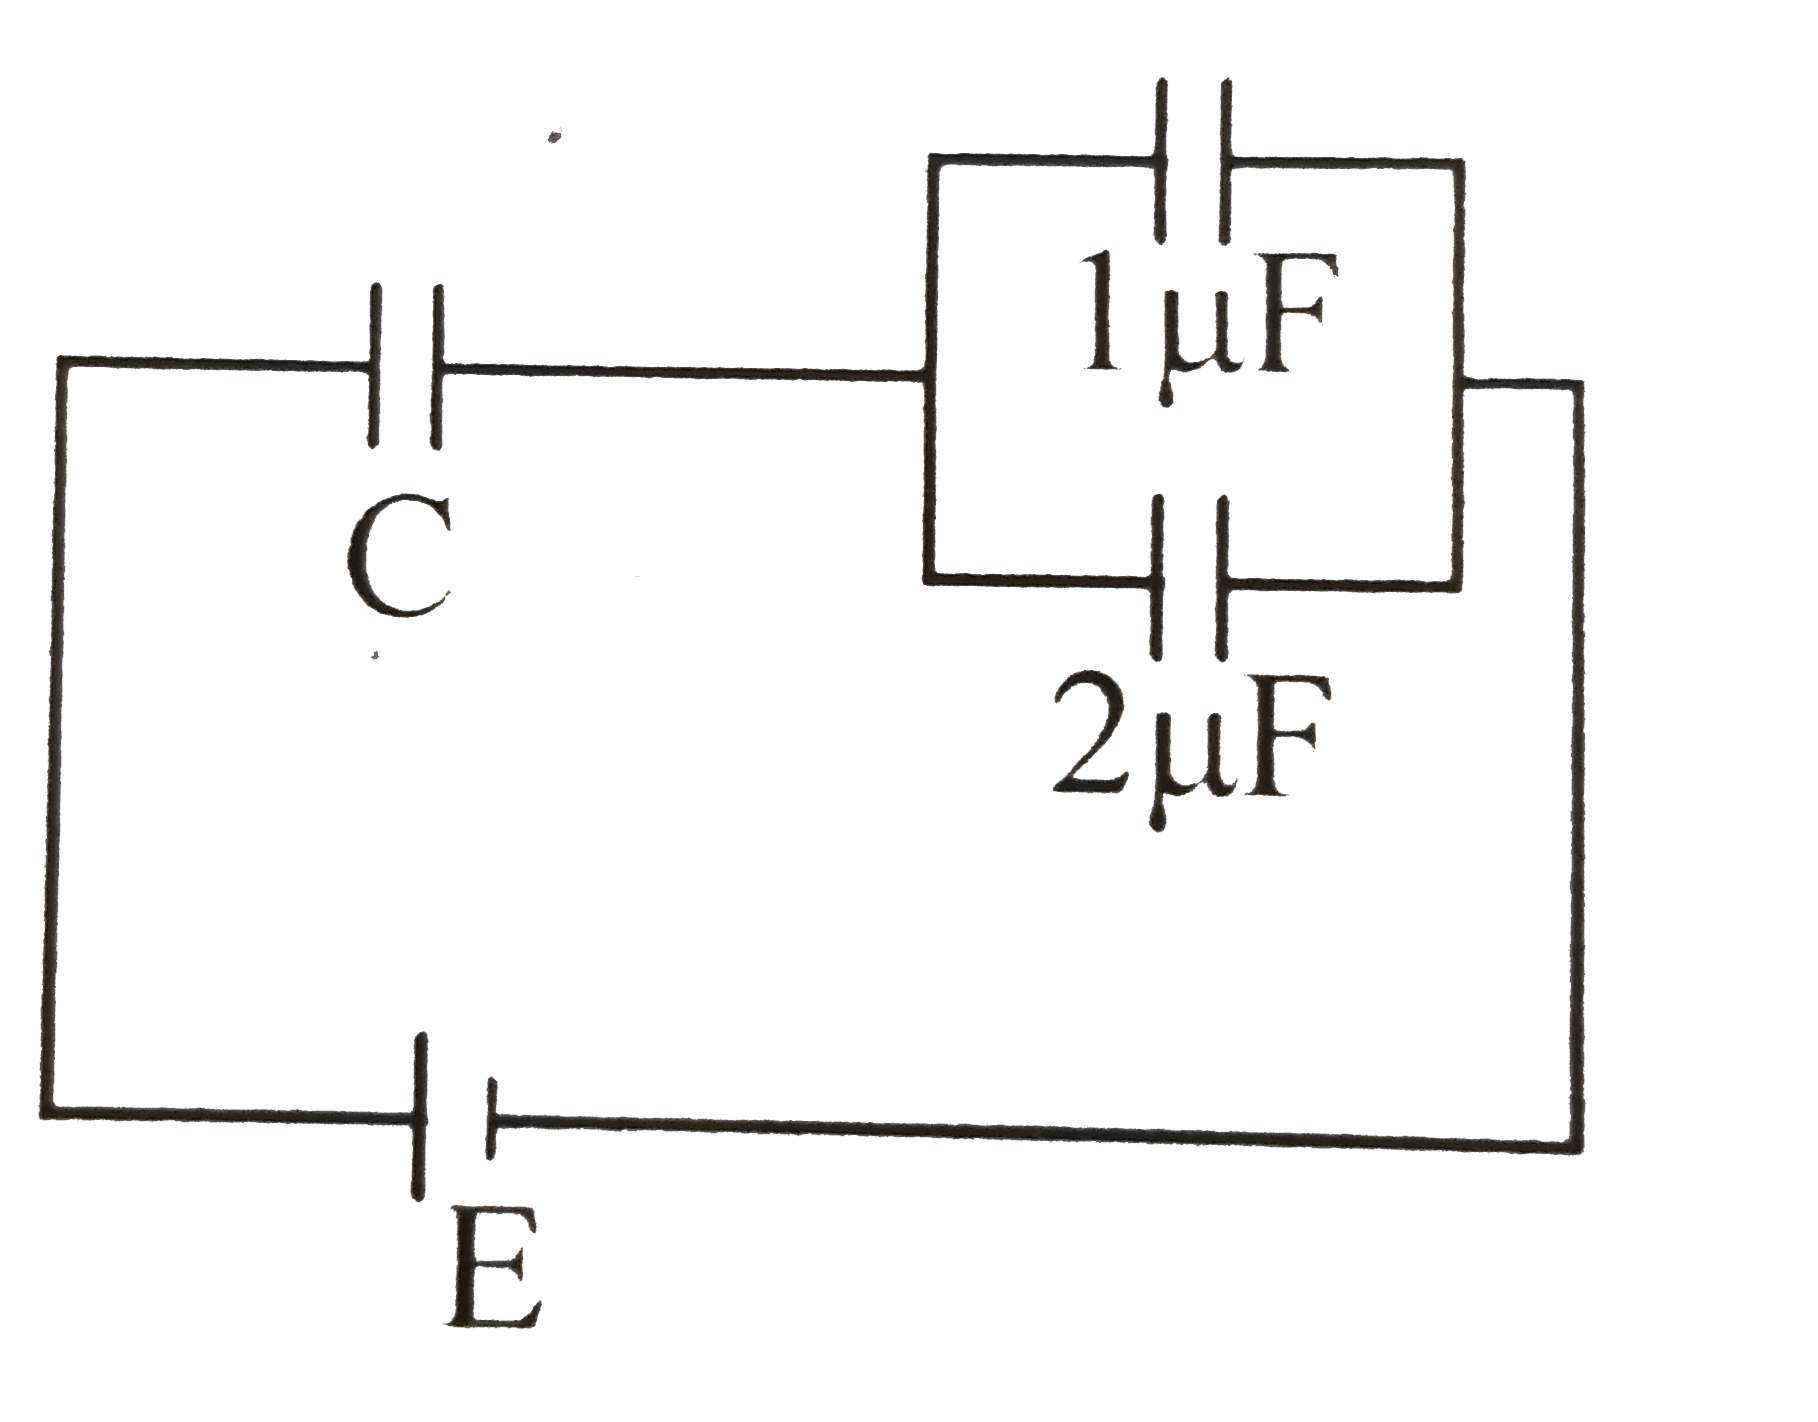 In the given circuit, charge Q(2) on the 2muF capacitor changes as C is varied from 1muF to 3muF. Q(2) as a function of 'C' is given properly by : (figure are drawn schematically and are not to scale)